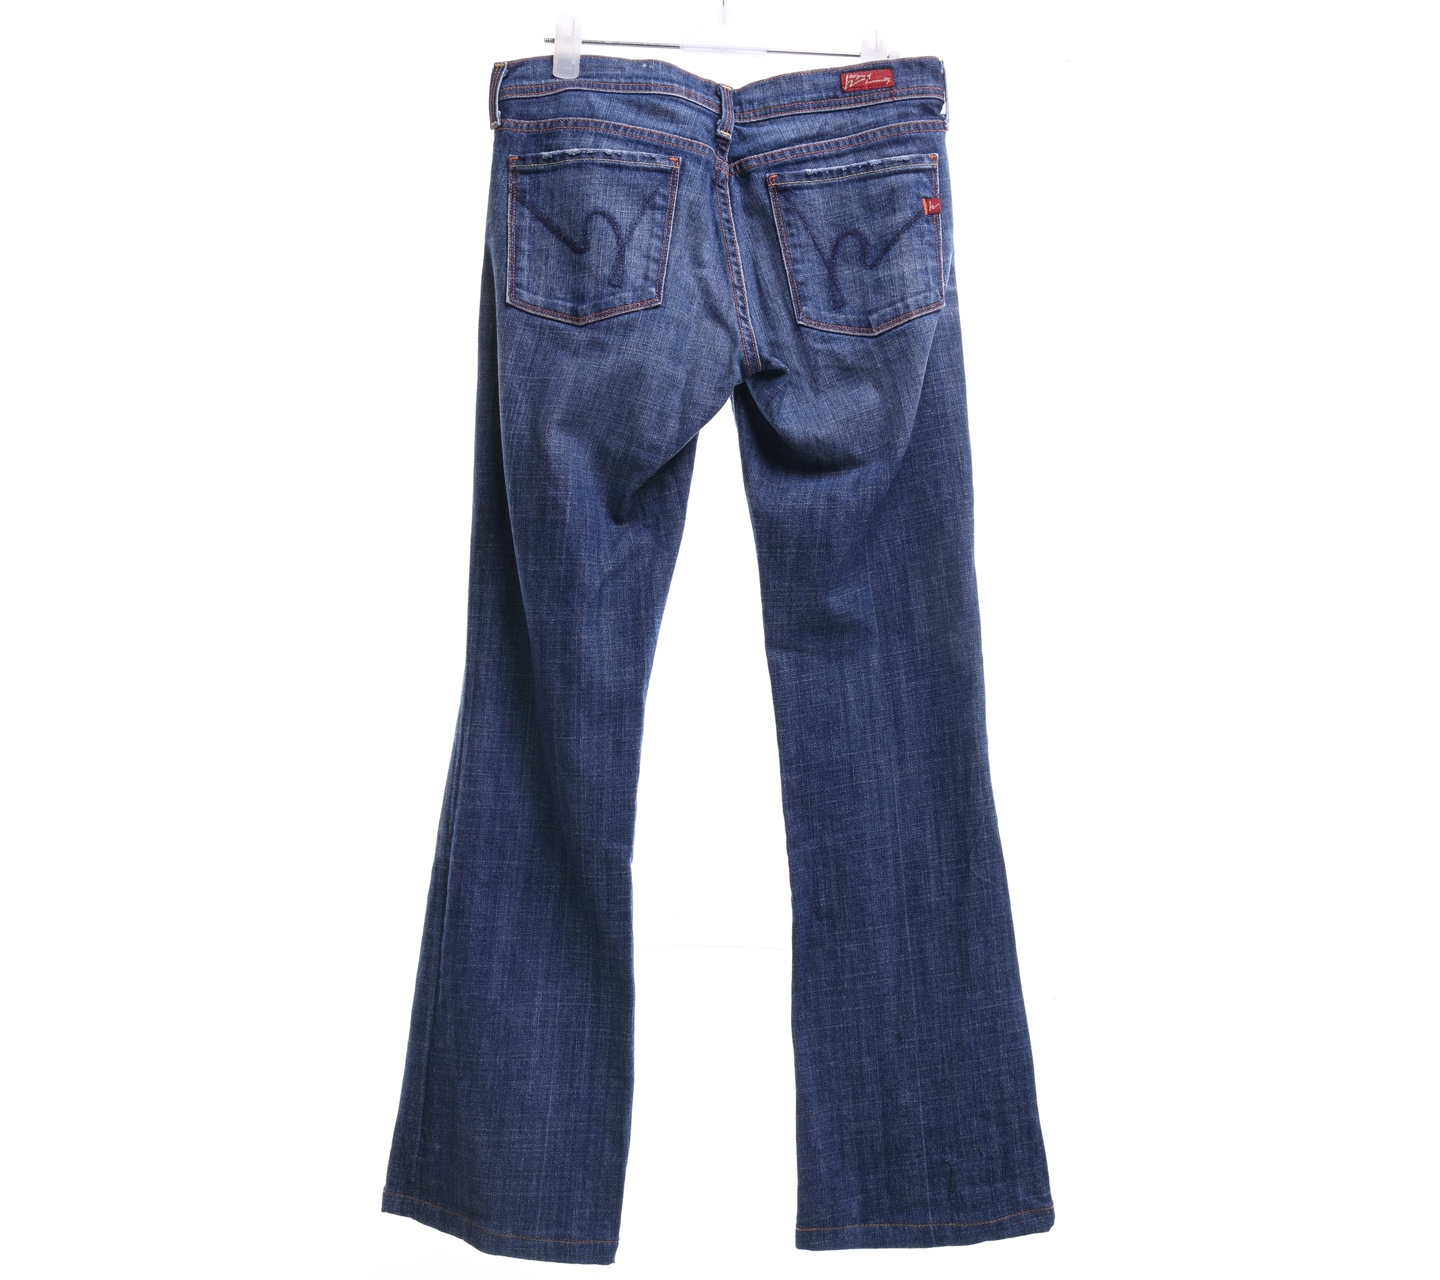 Citizens of Humanity Dark Blue Long Pants